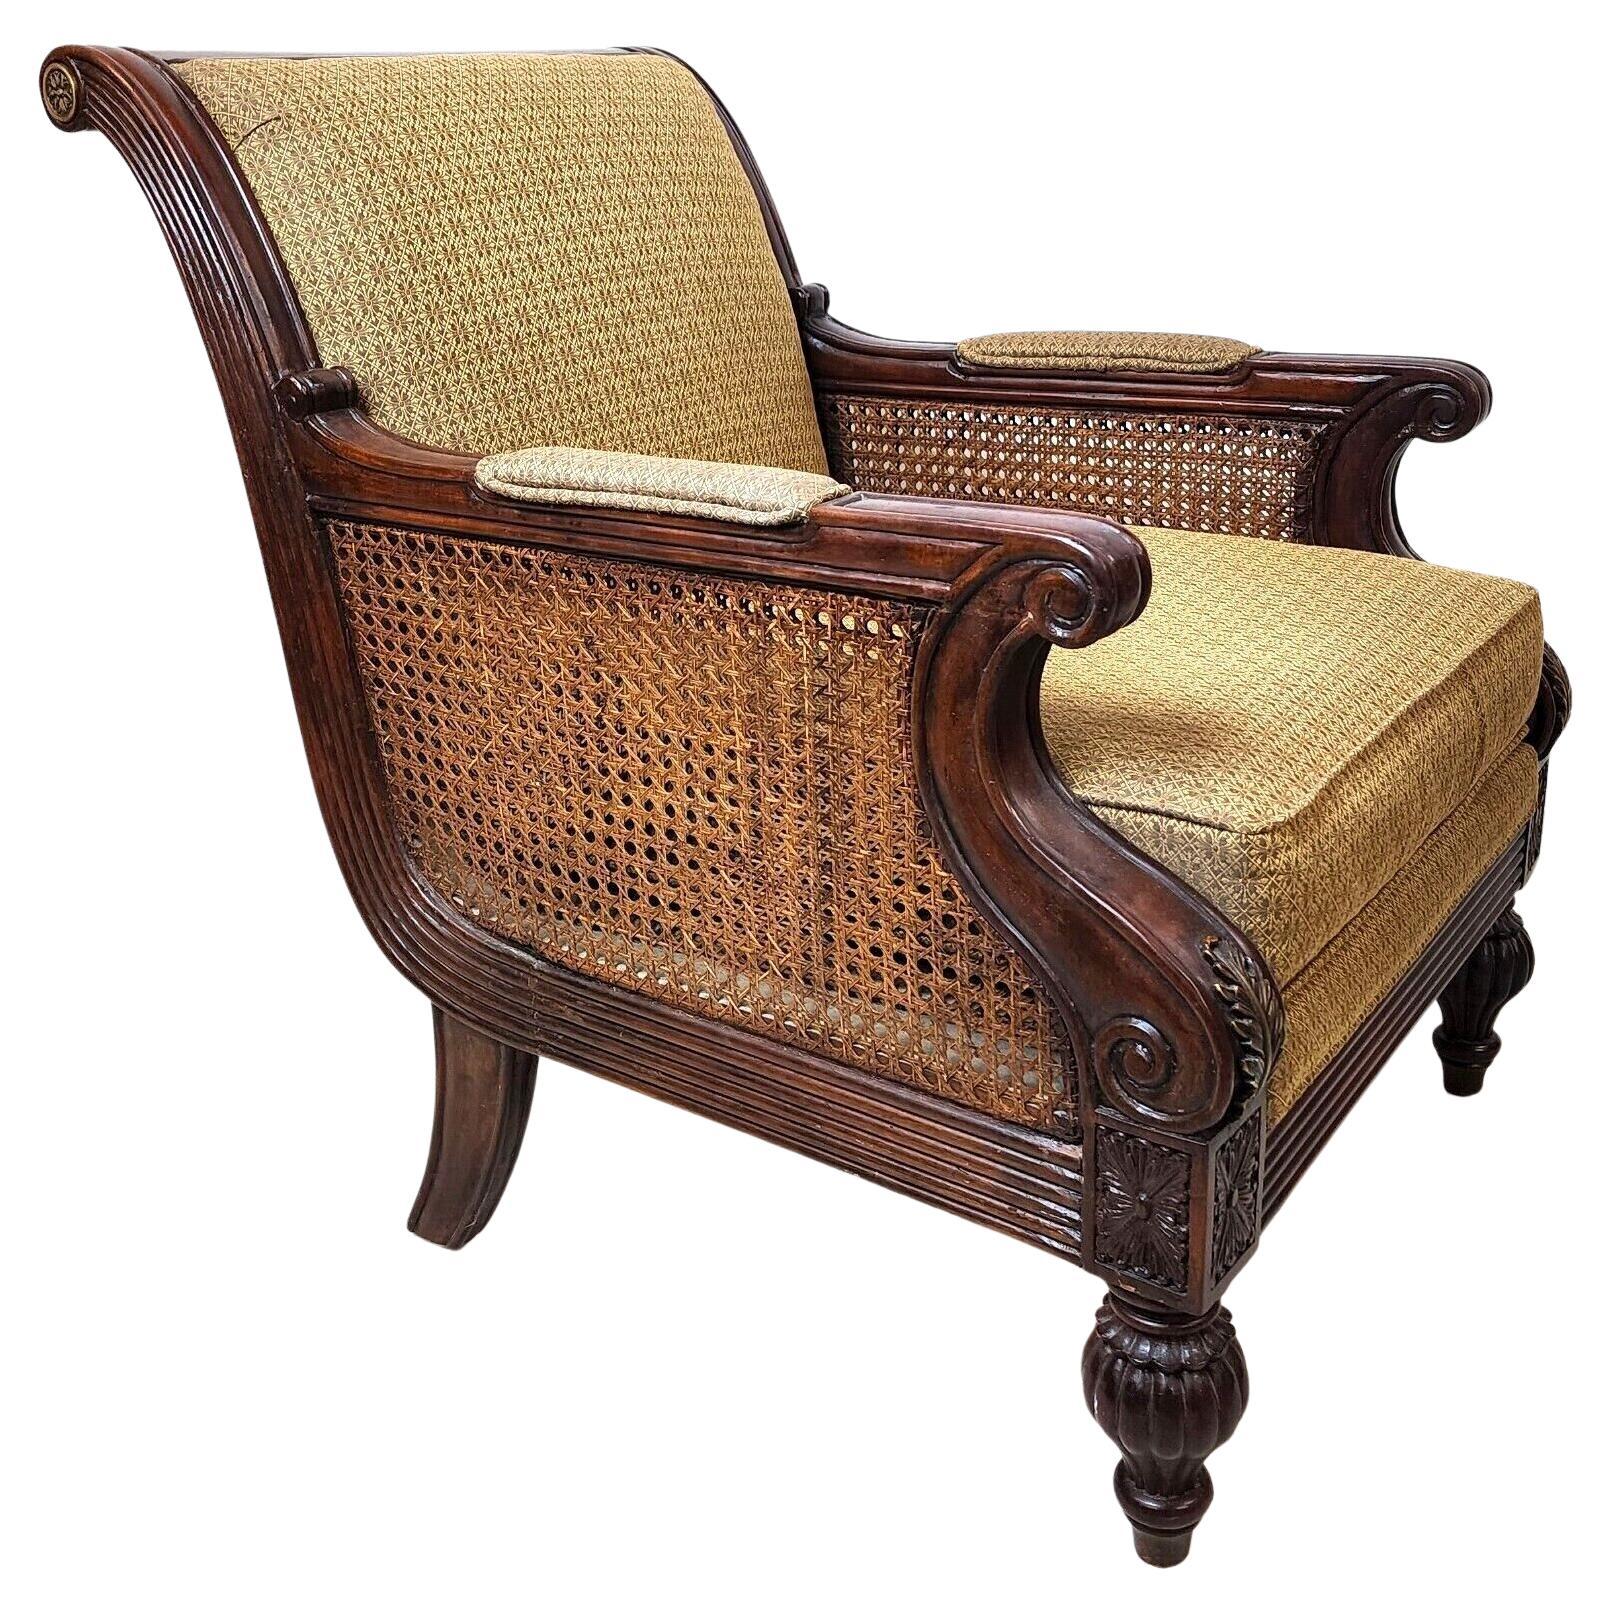 Vintage Double Caned Lounge Chair by Schnadig